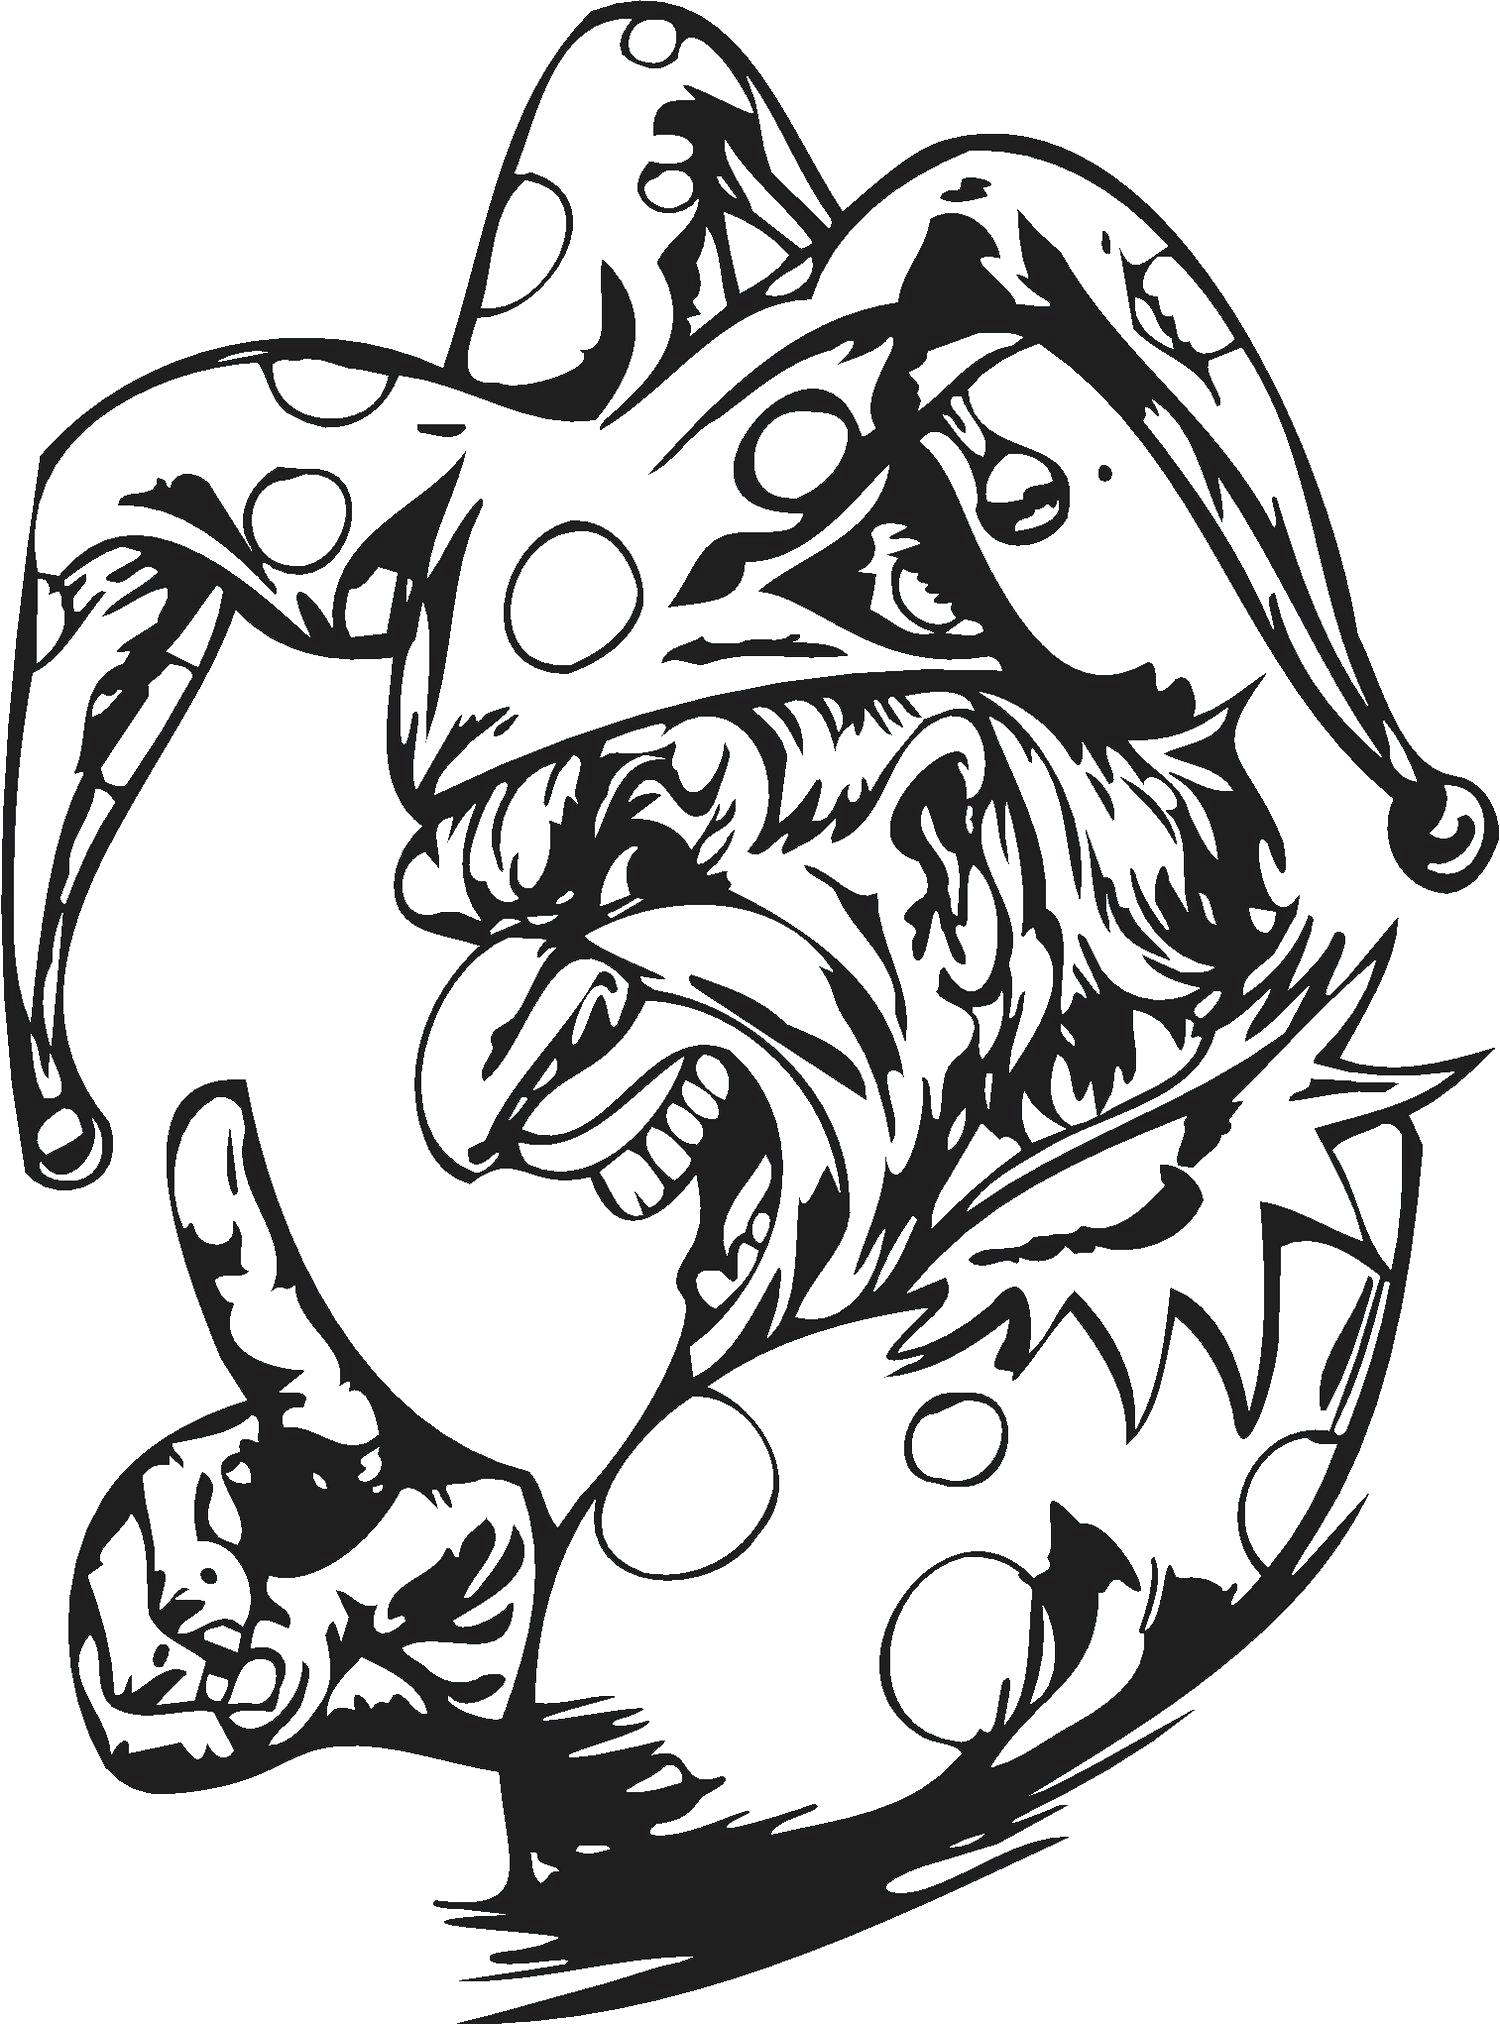 evil clown coloring pages evil joker drawing at getdrawingscom free for personal clown evil coloring pages 